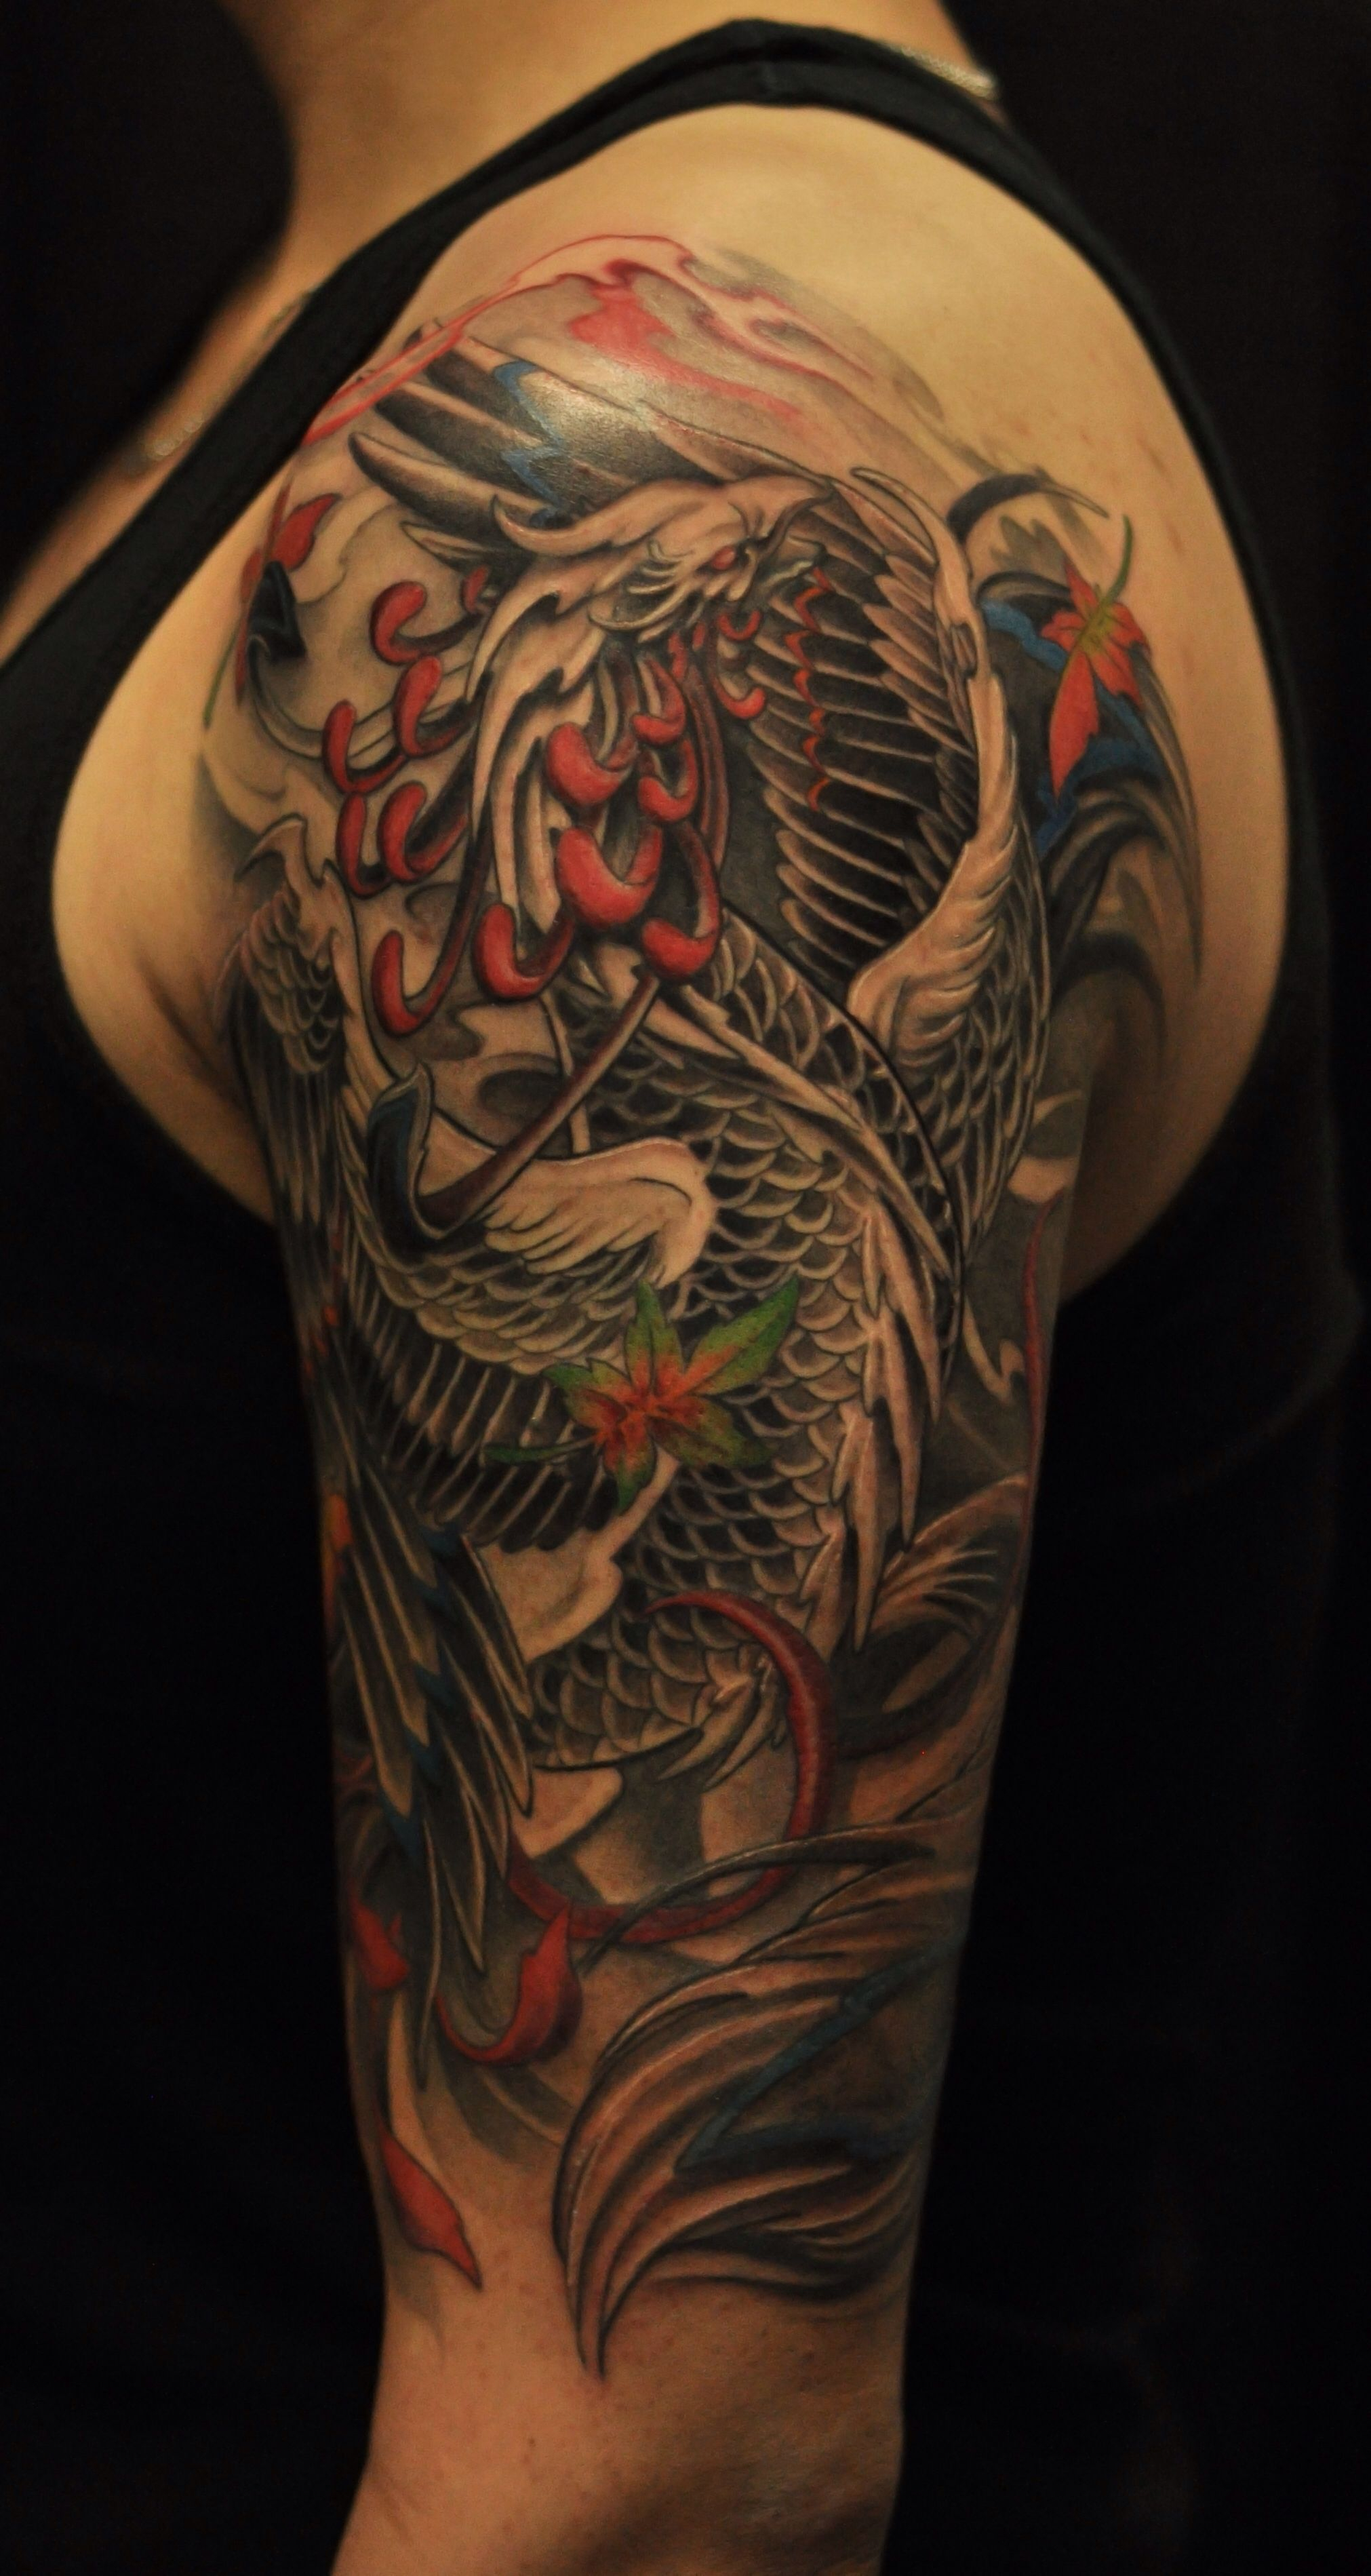 This Is One Of The Coolest Phoenix Tattoos Ive Seen Tattoo in size 2022 X 3798